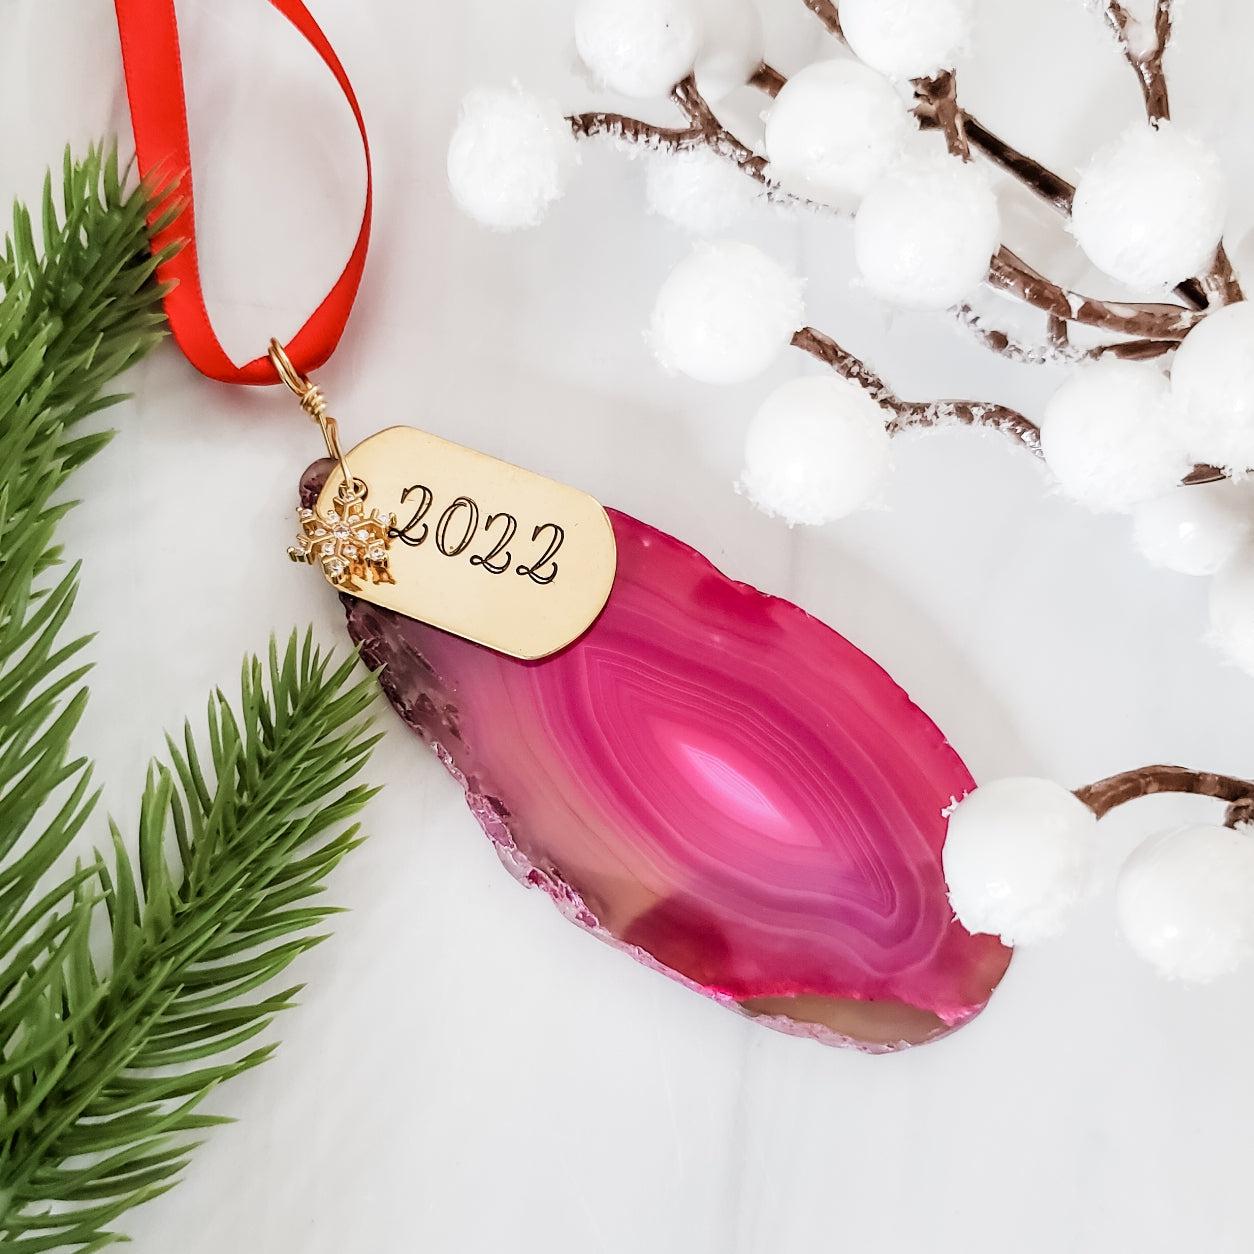 Agate Slice Ornament with 2023 Tag Salt and Sparkle